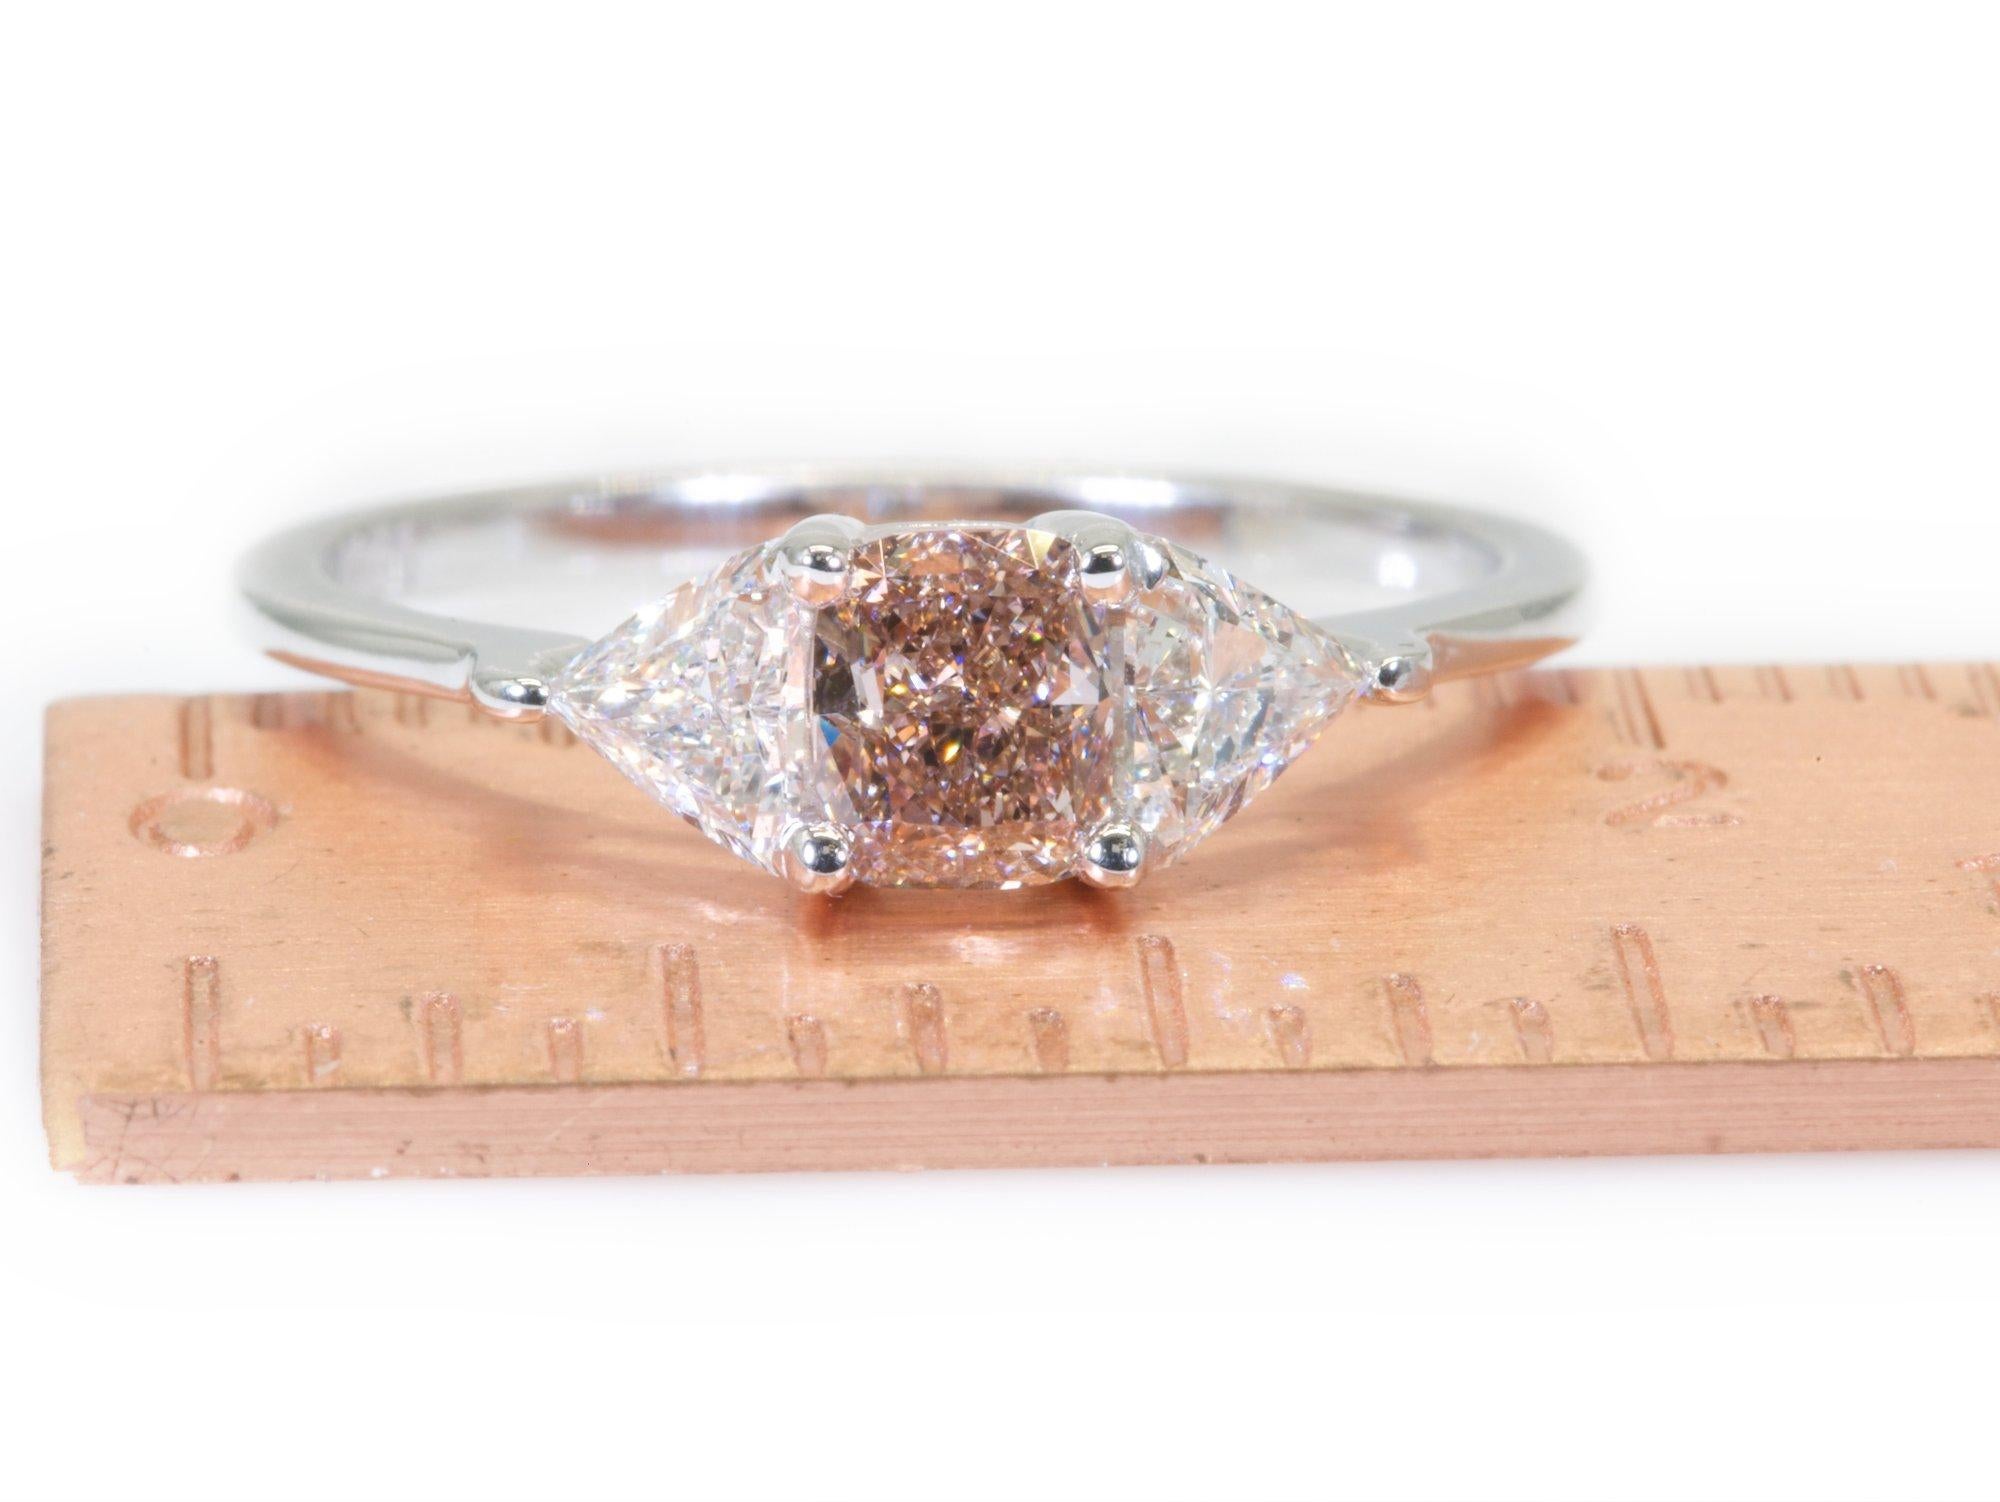 Rare and amazing natural pink brown diamond with 2 shine and sparkle Trillions on the side mounted in a Beautiful 18k white gold diamond ring with GIA certificate for the pink diamond.

one of kind ring with 0.82 carat 

Set with:

-1 diamond main